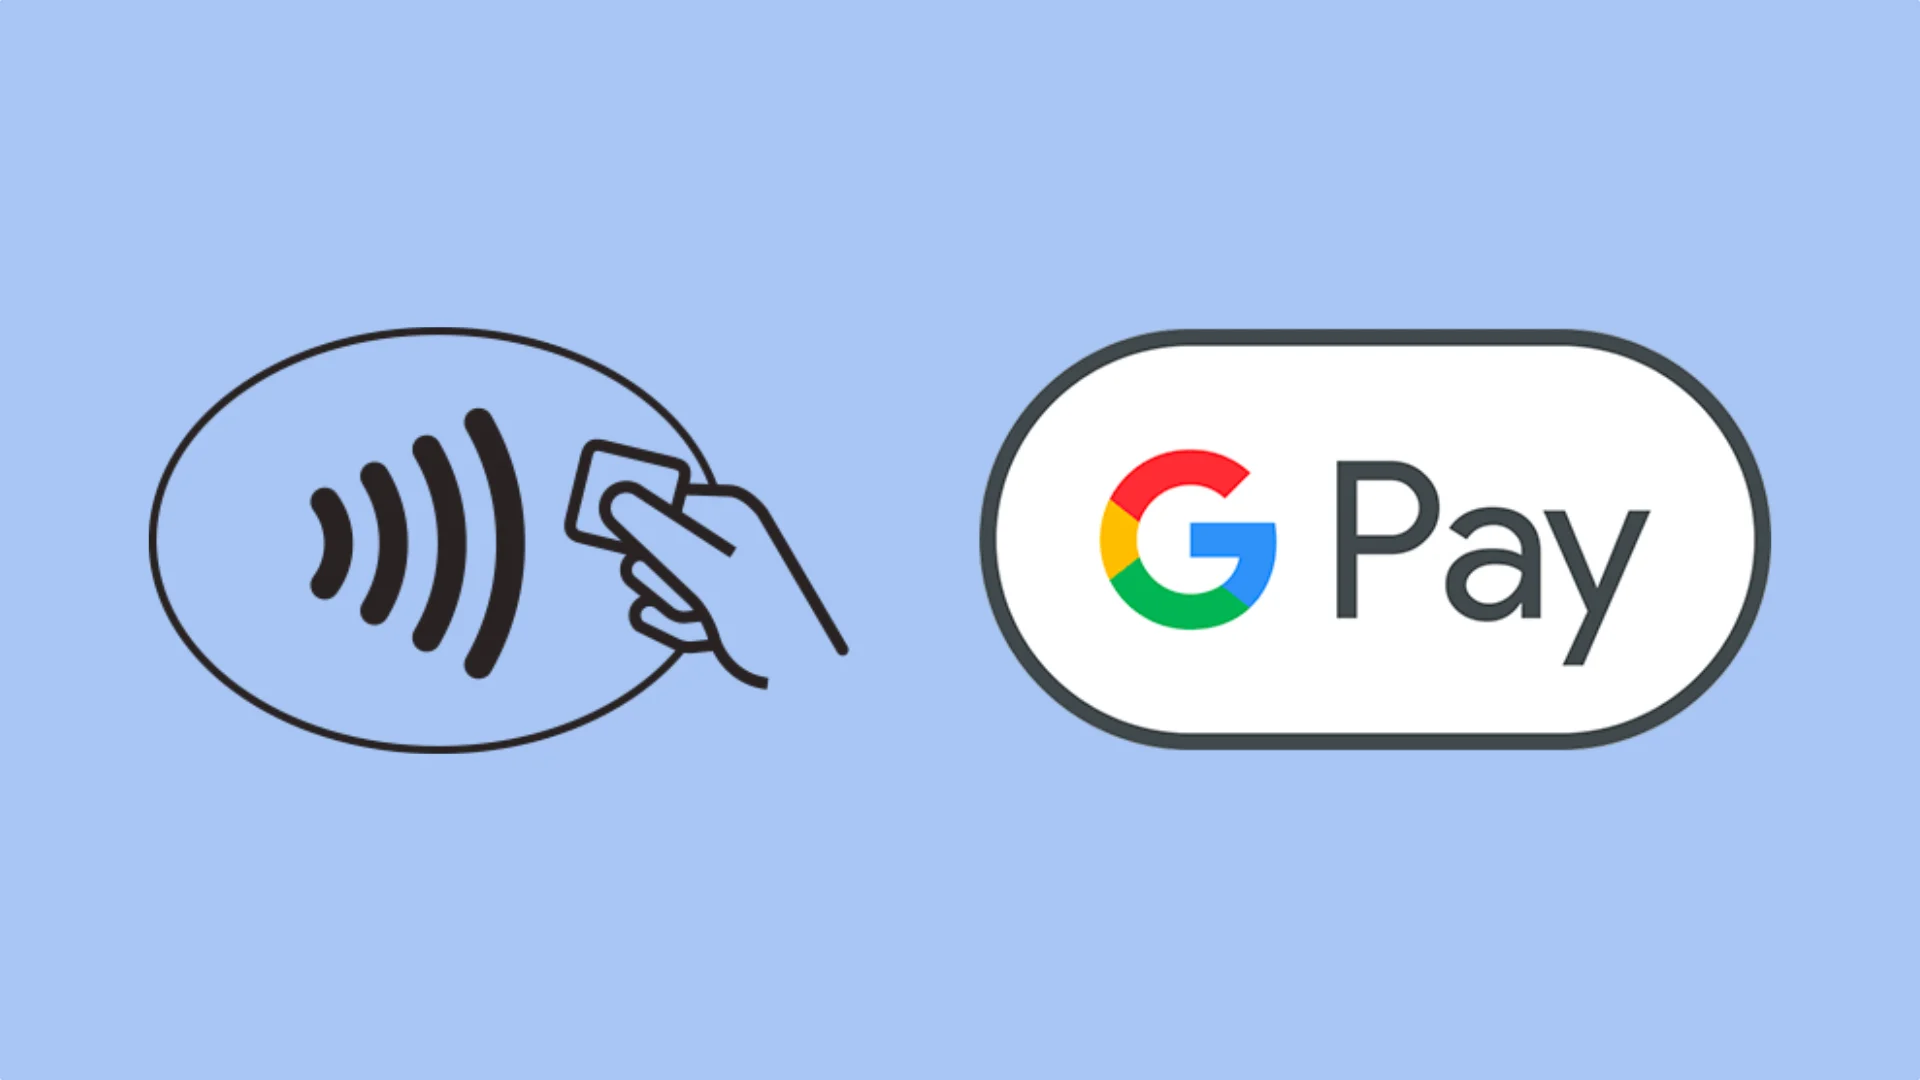 Google to Shut Down Google Pay App in US